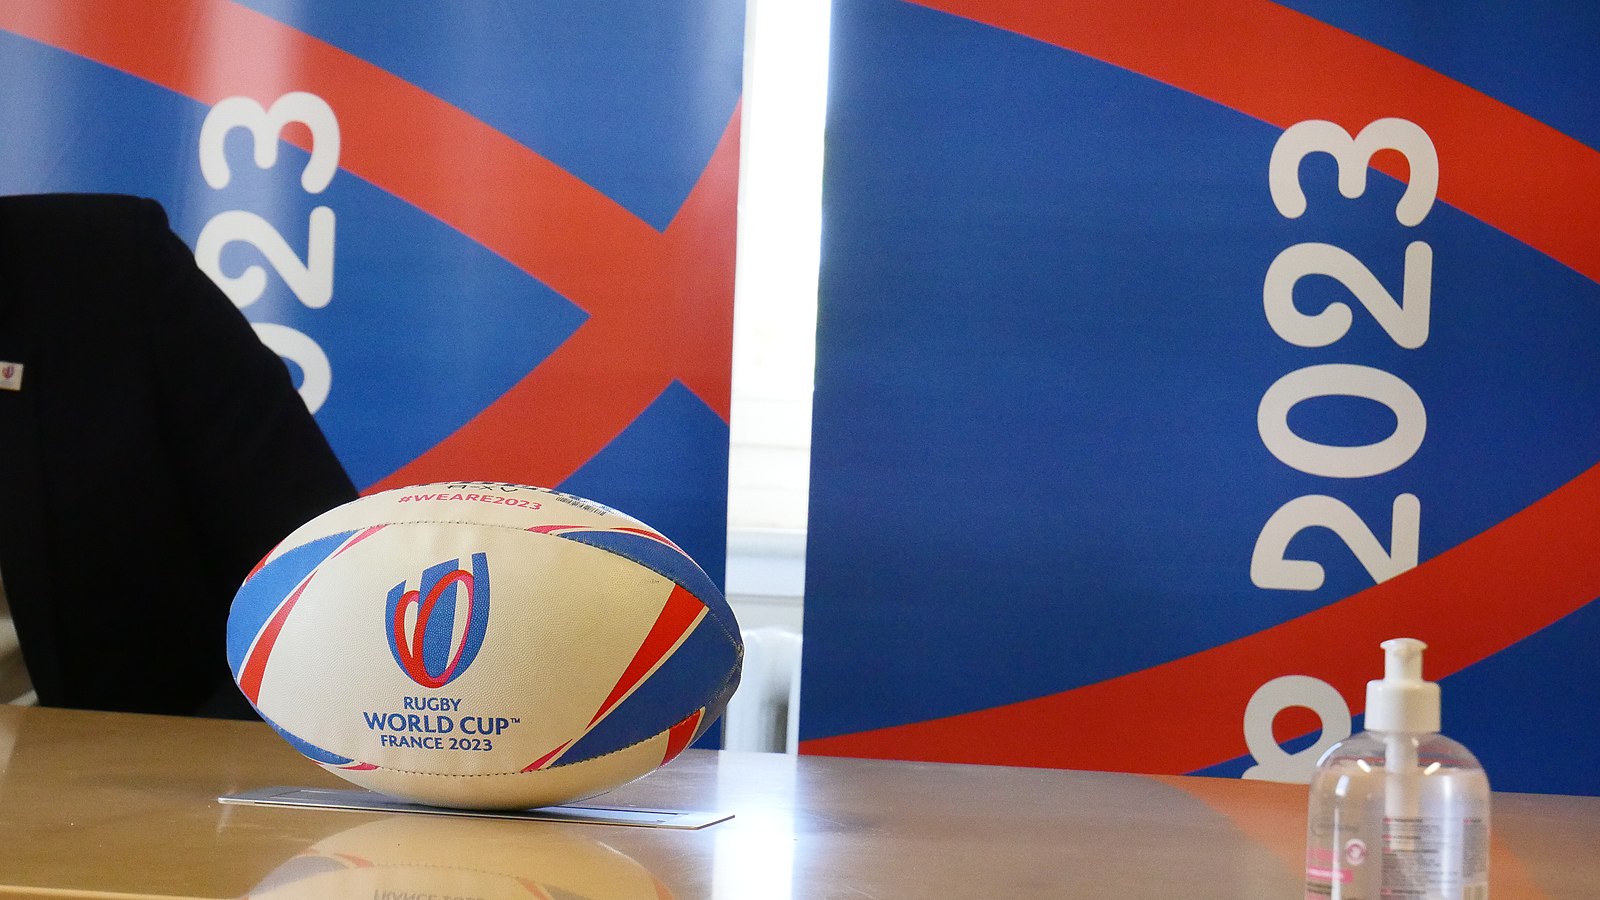 The Rugby World Cup is being played in France